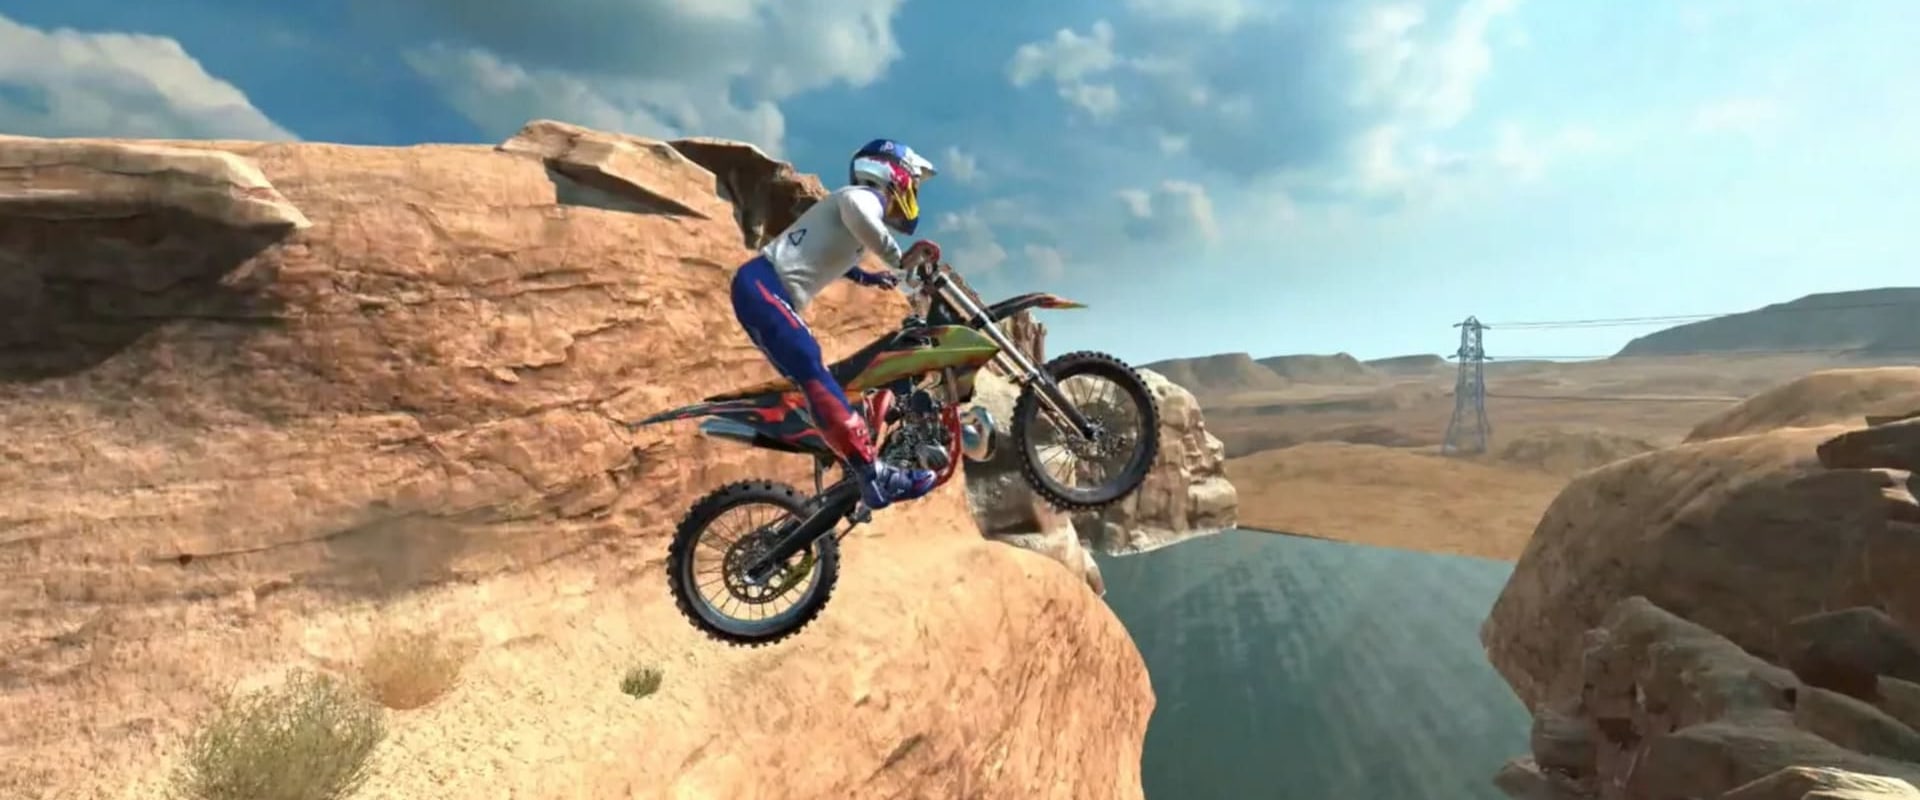 The Best Motocross Video Games for PC